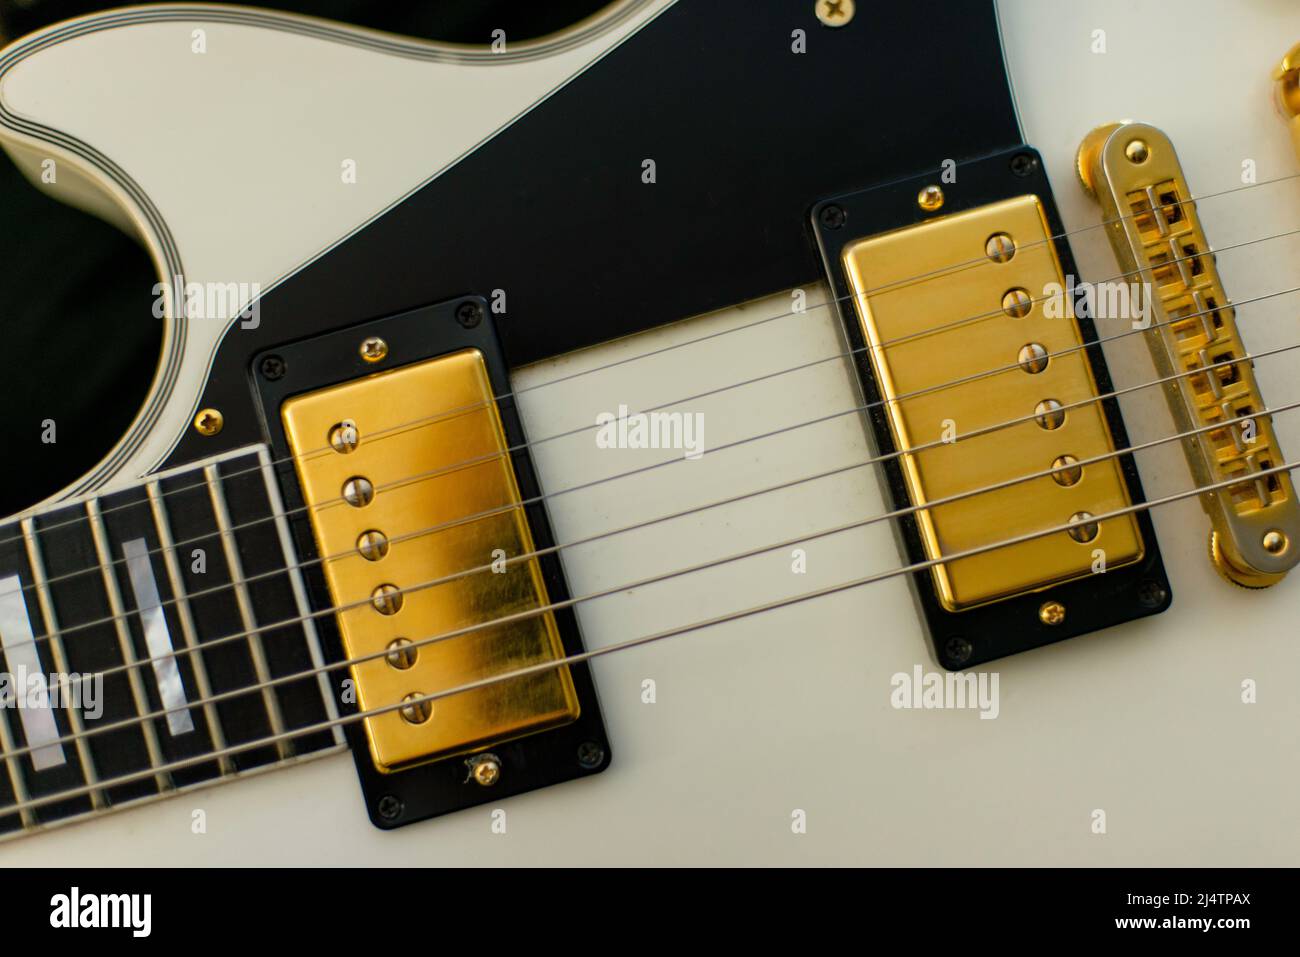 Gibson guitar in white, black and gold with close-up of strings and pickups. Stock Photo